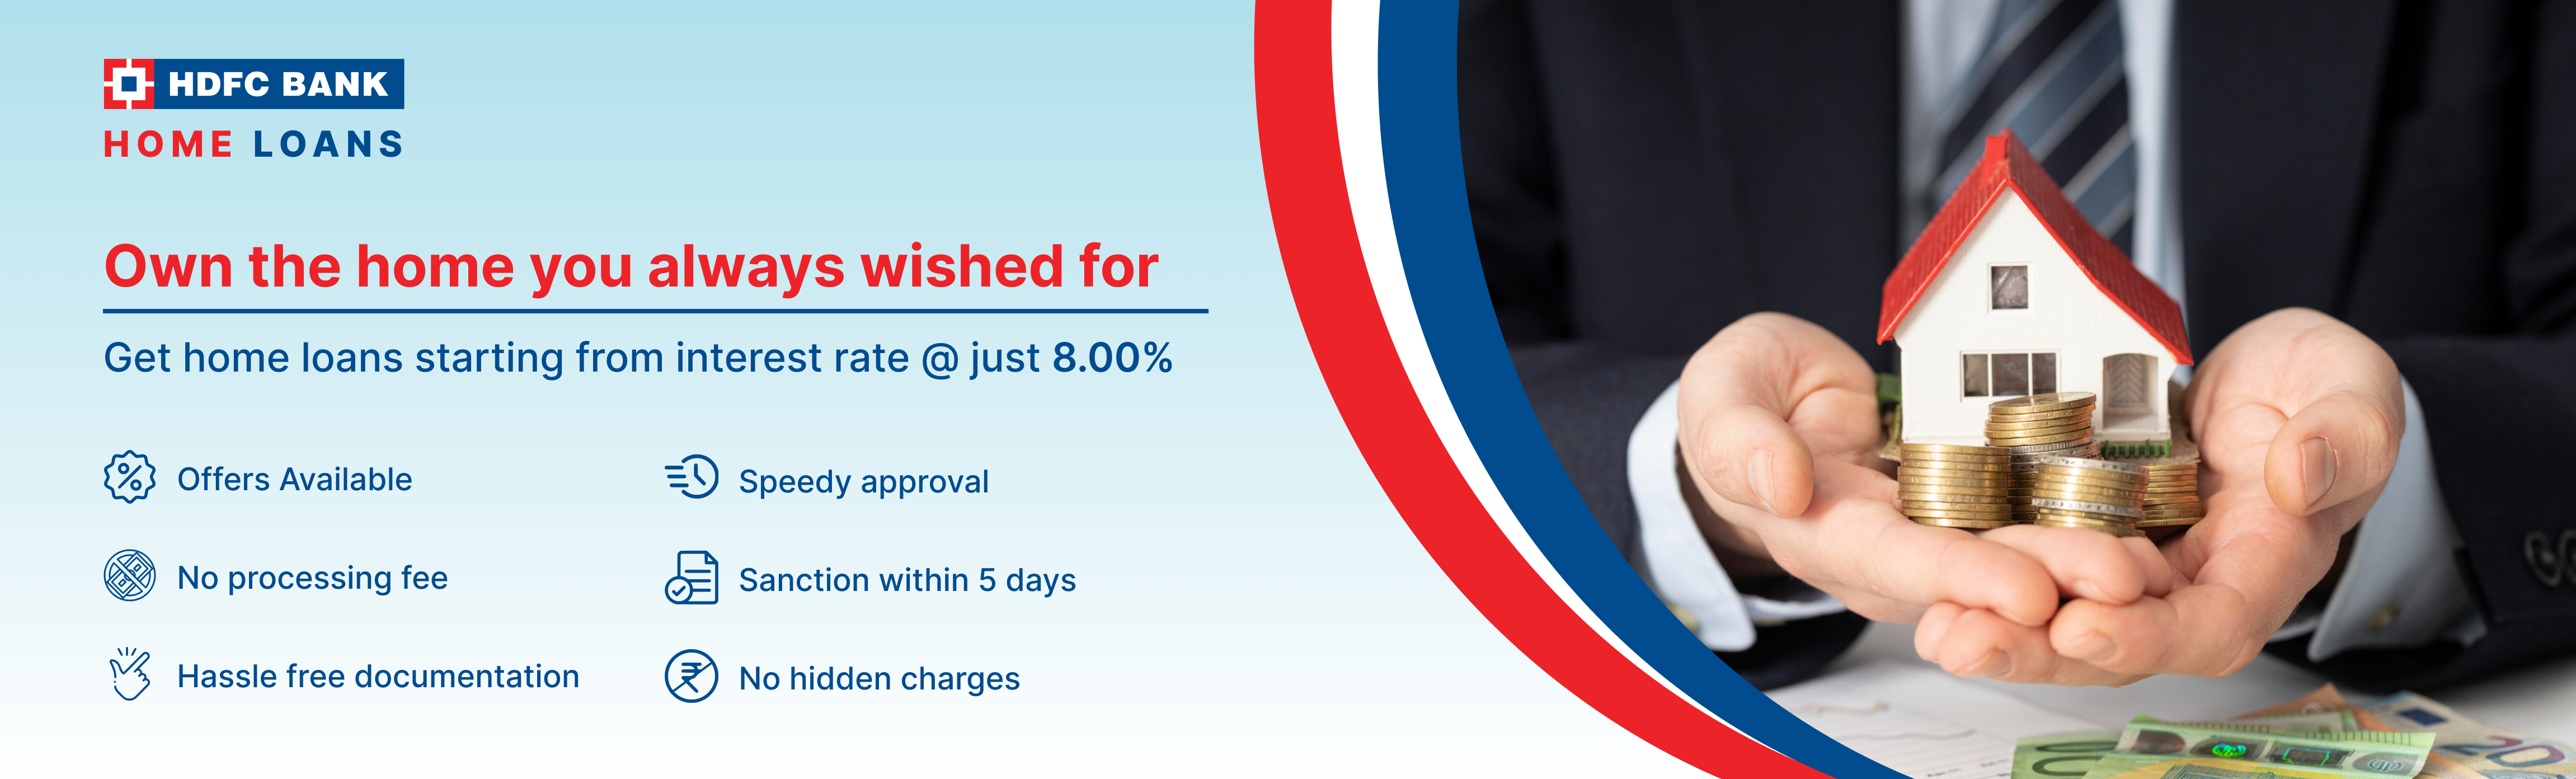 HDFC Bank - Home Loans - Own the home you always wished for